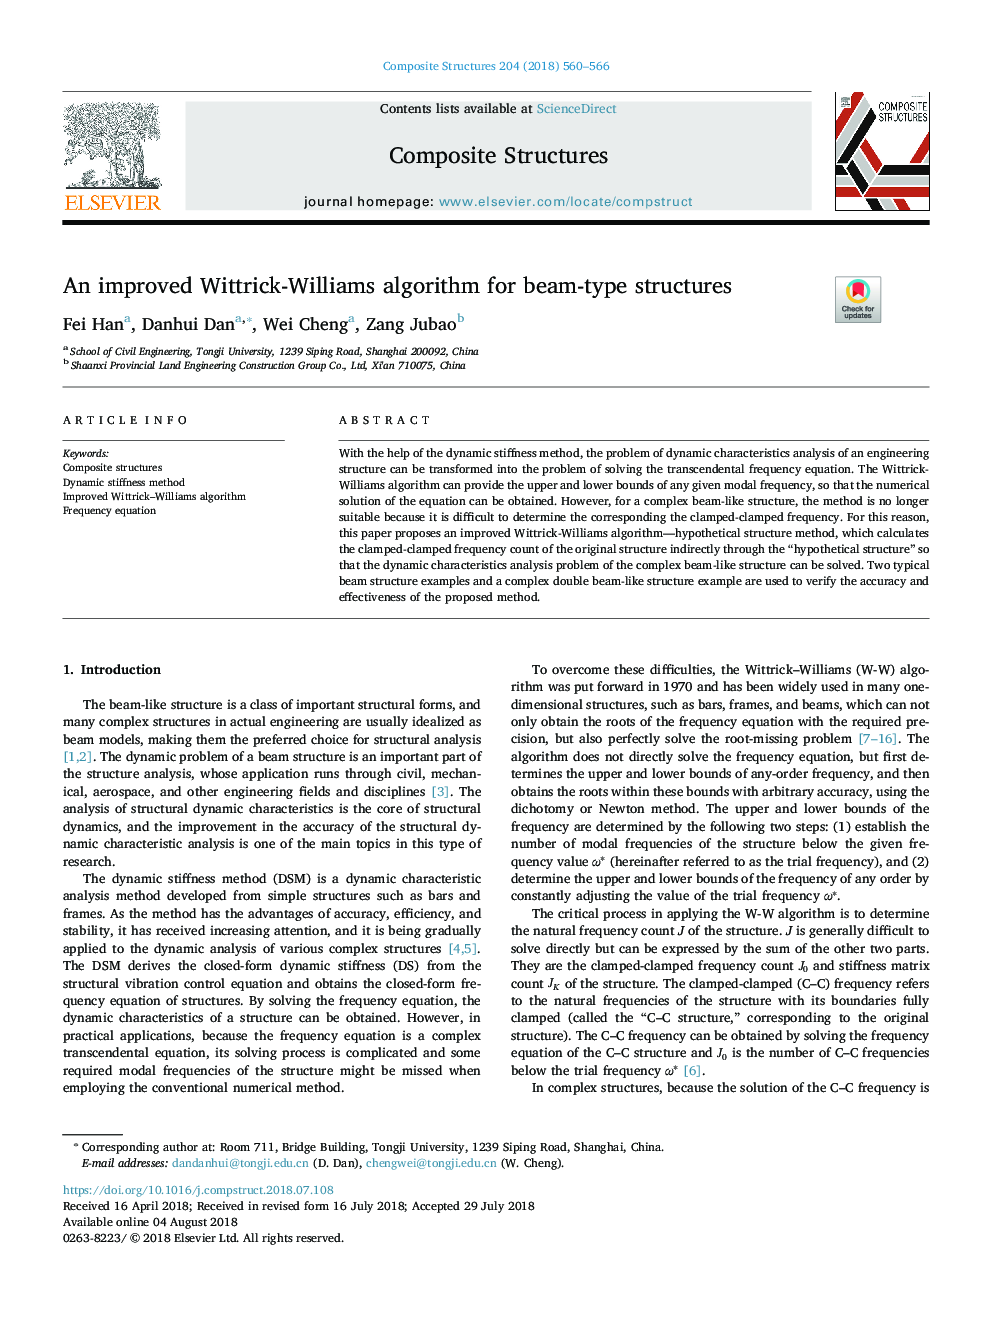 An improved Wittrick-Williams algorithm for beam-type structures